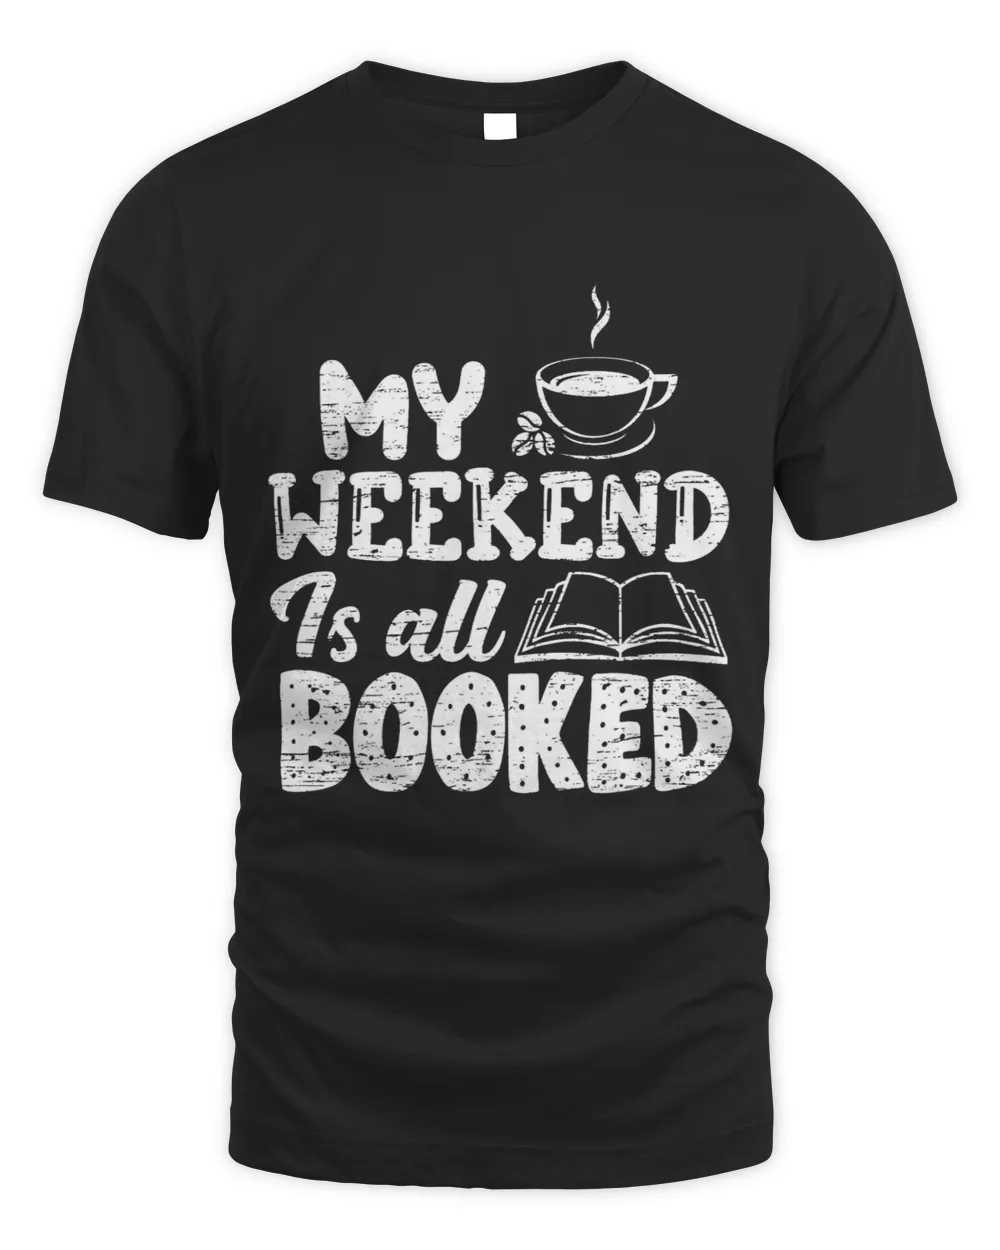 My weekend is All Booked distressed Design with Books 1